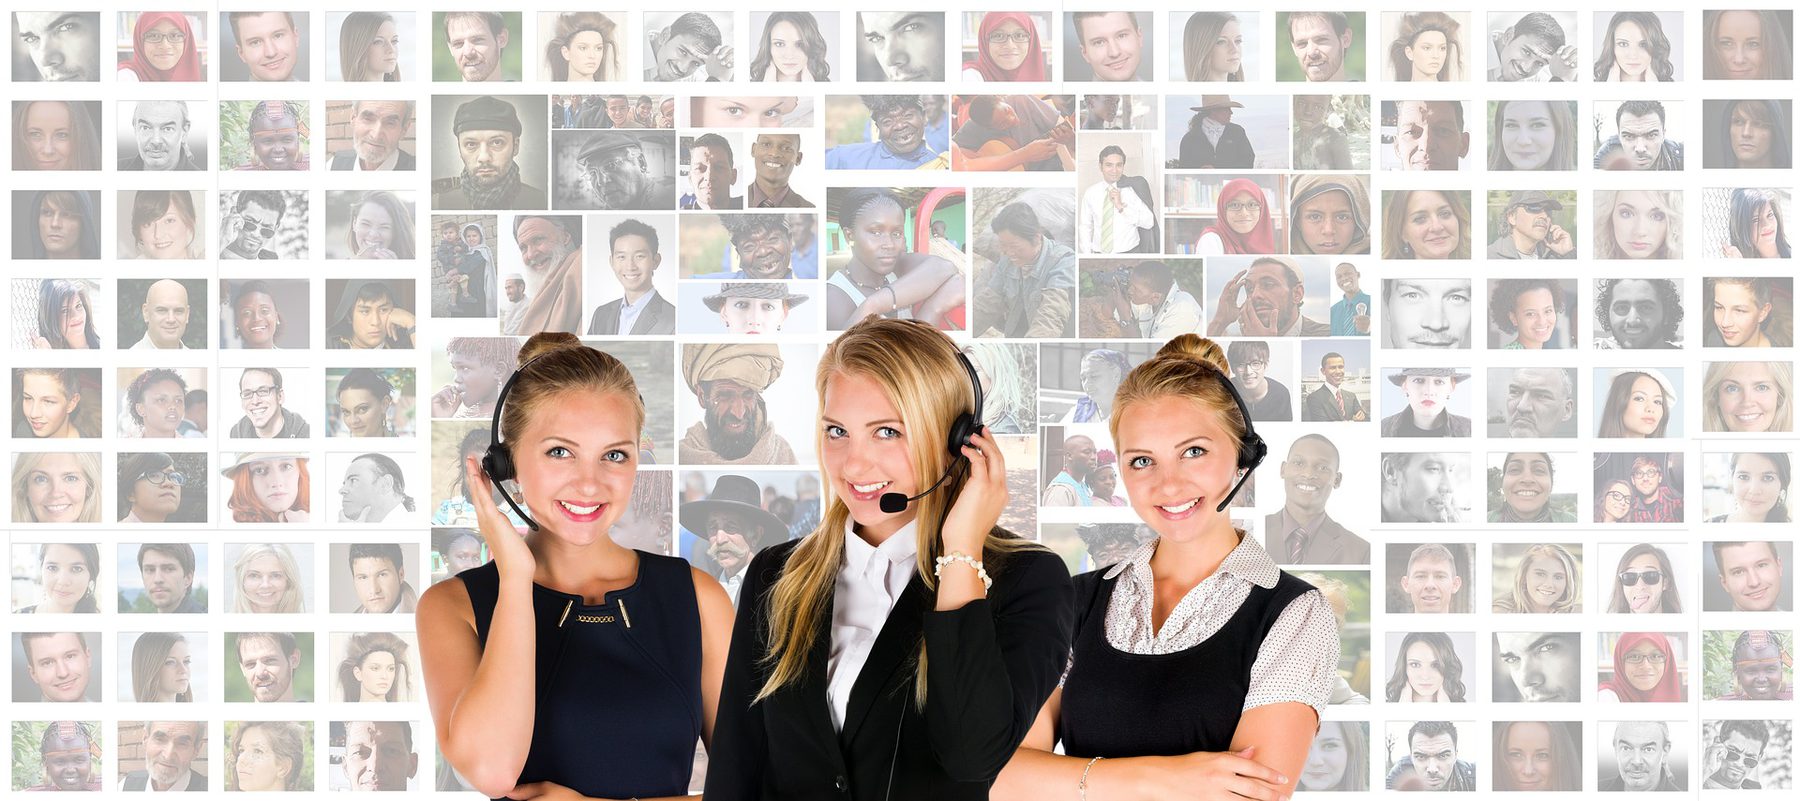 Customer Service (Sector Header: People with Telephone Headsets)